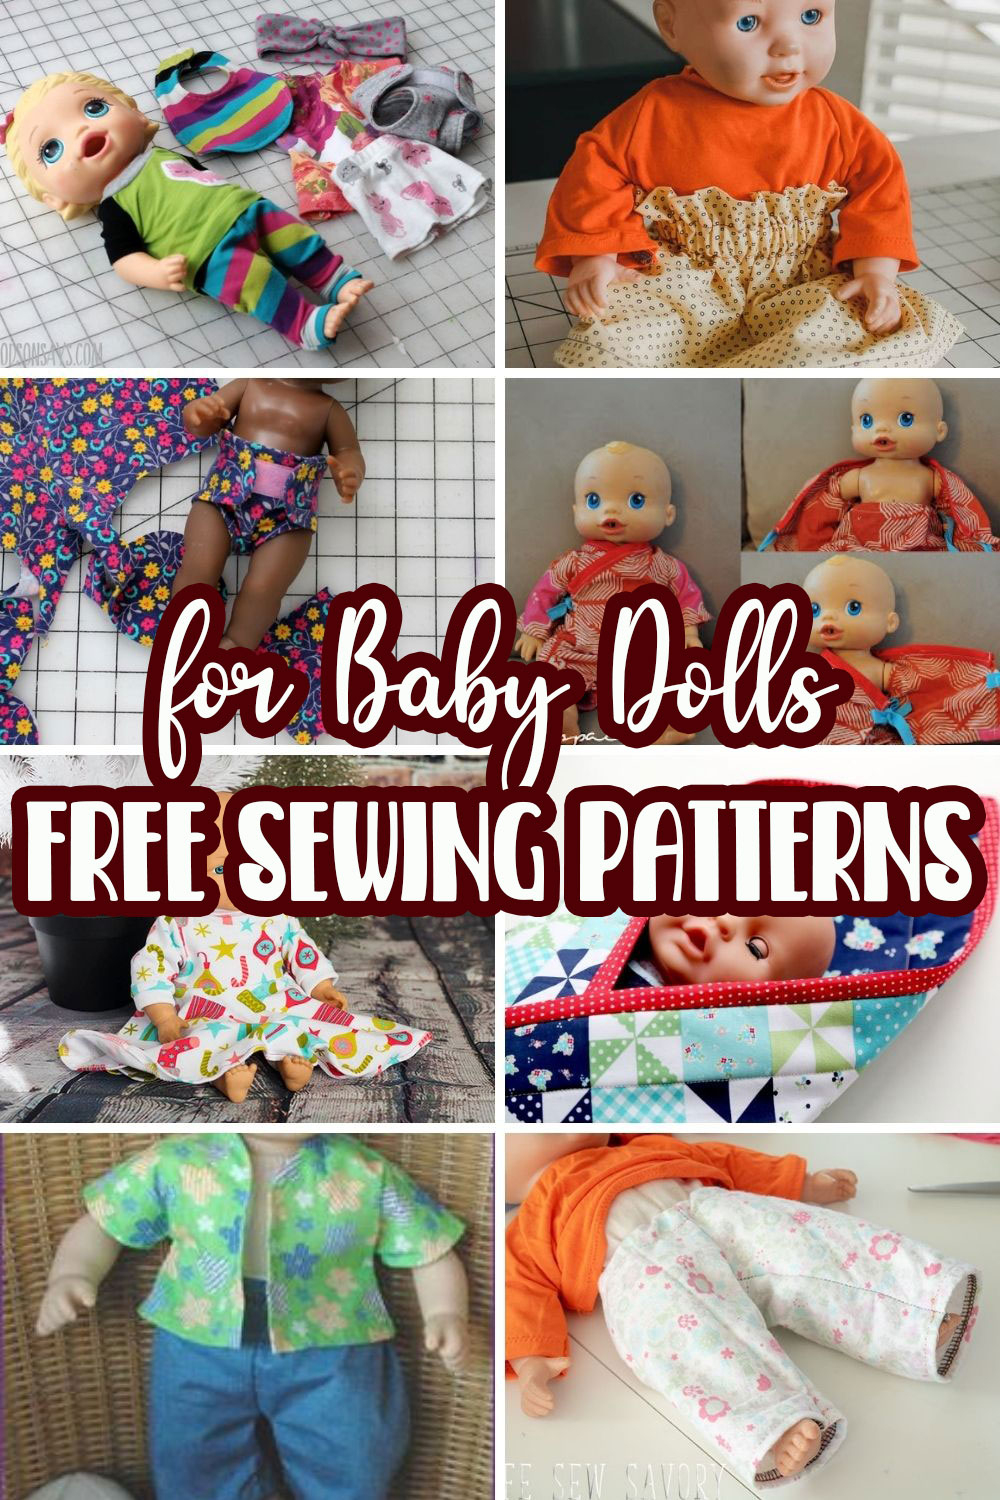 Free Doll Clothes Patterns For Baby Dolls - Life Sew Savory - Free Printable Baby Doll Clothes Patterns